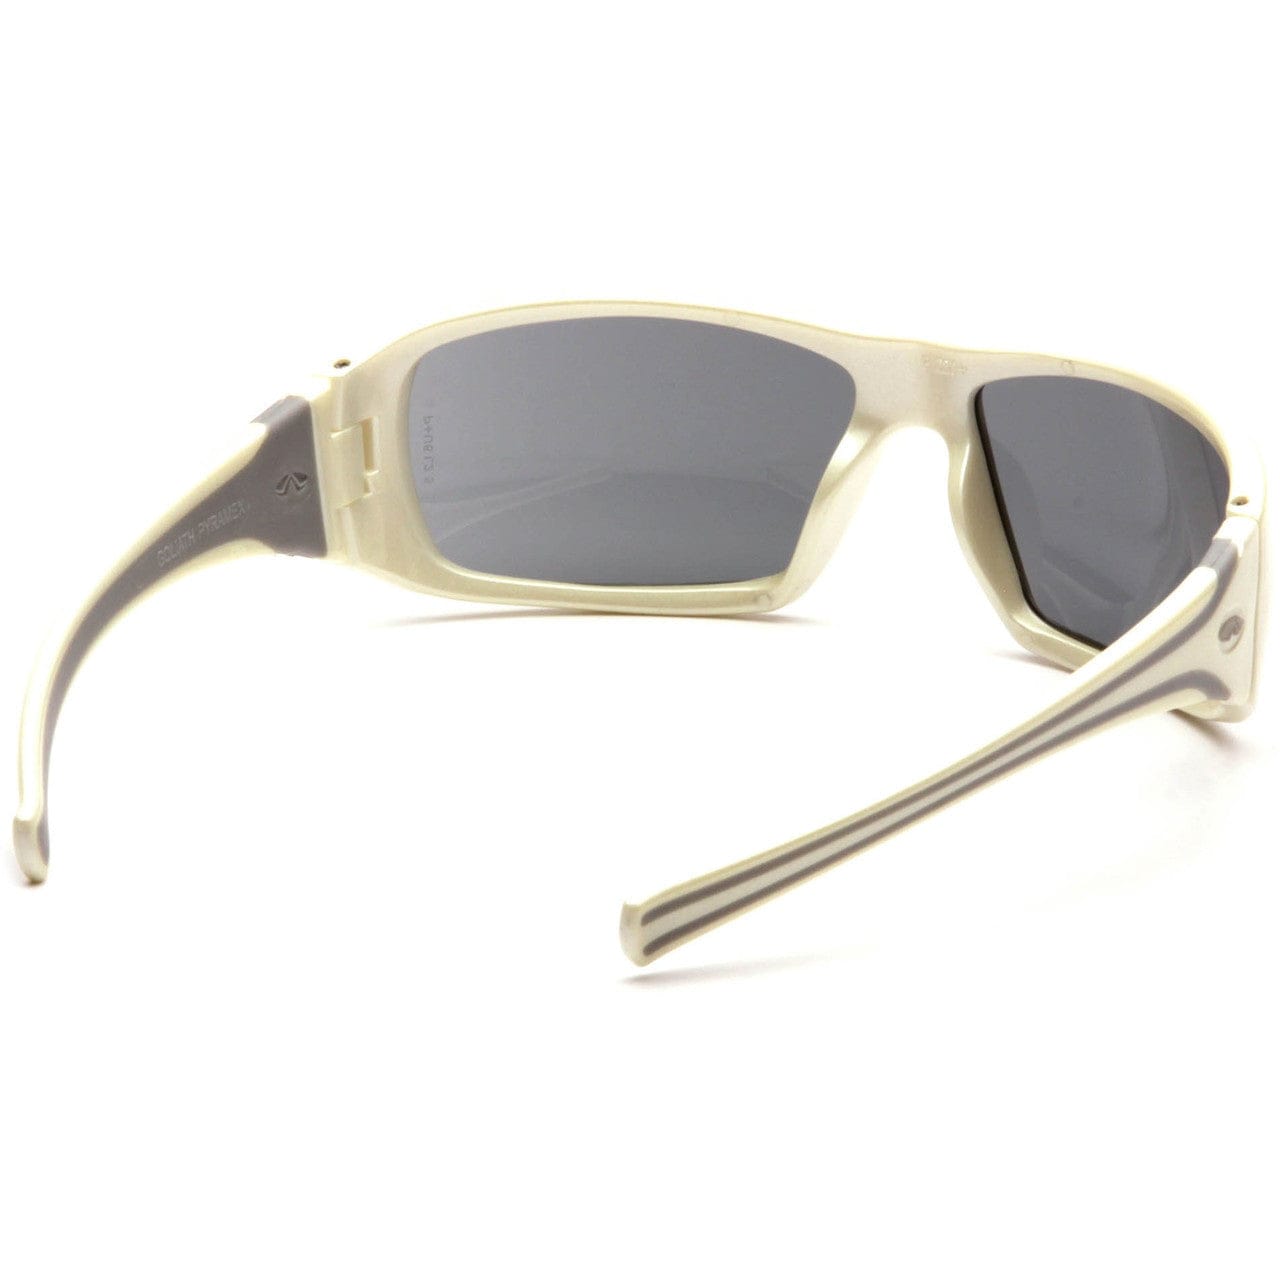 Pyramex Goliath Safety Glasses with Pearl White Frame and Gray Lens SW5620D Inside View